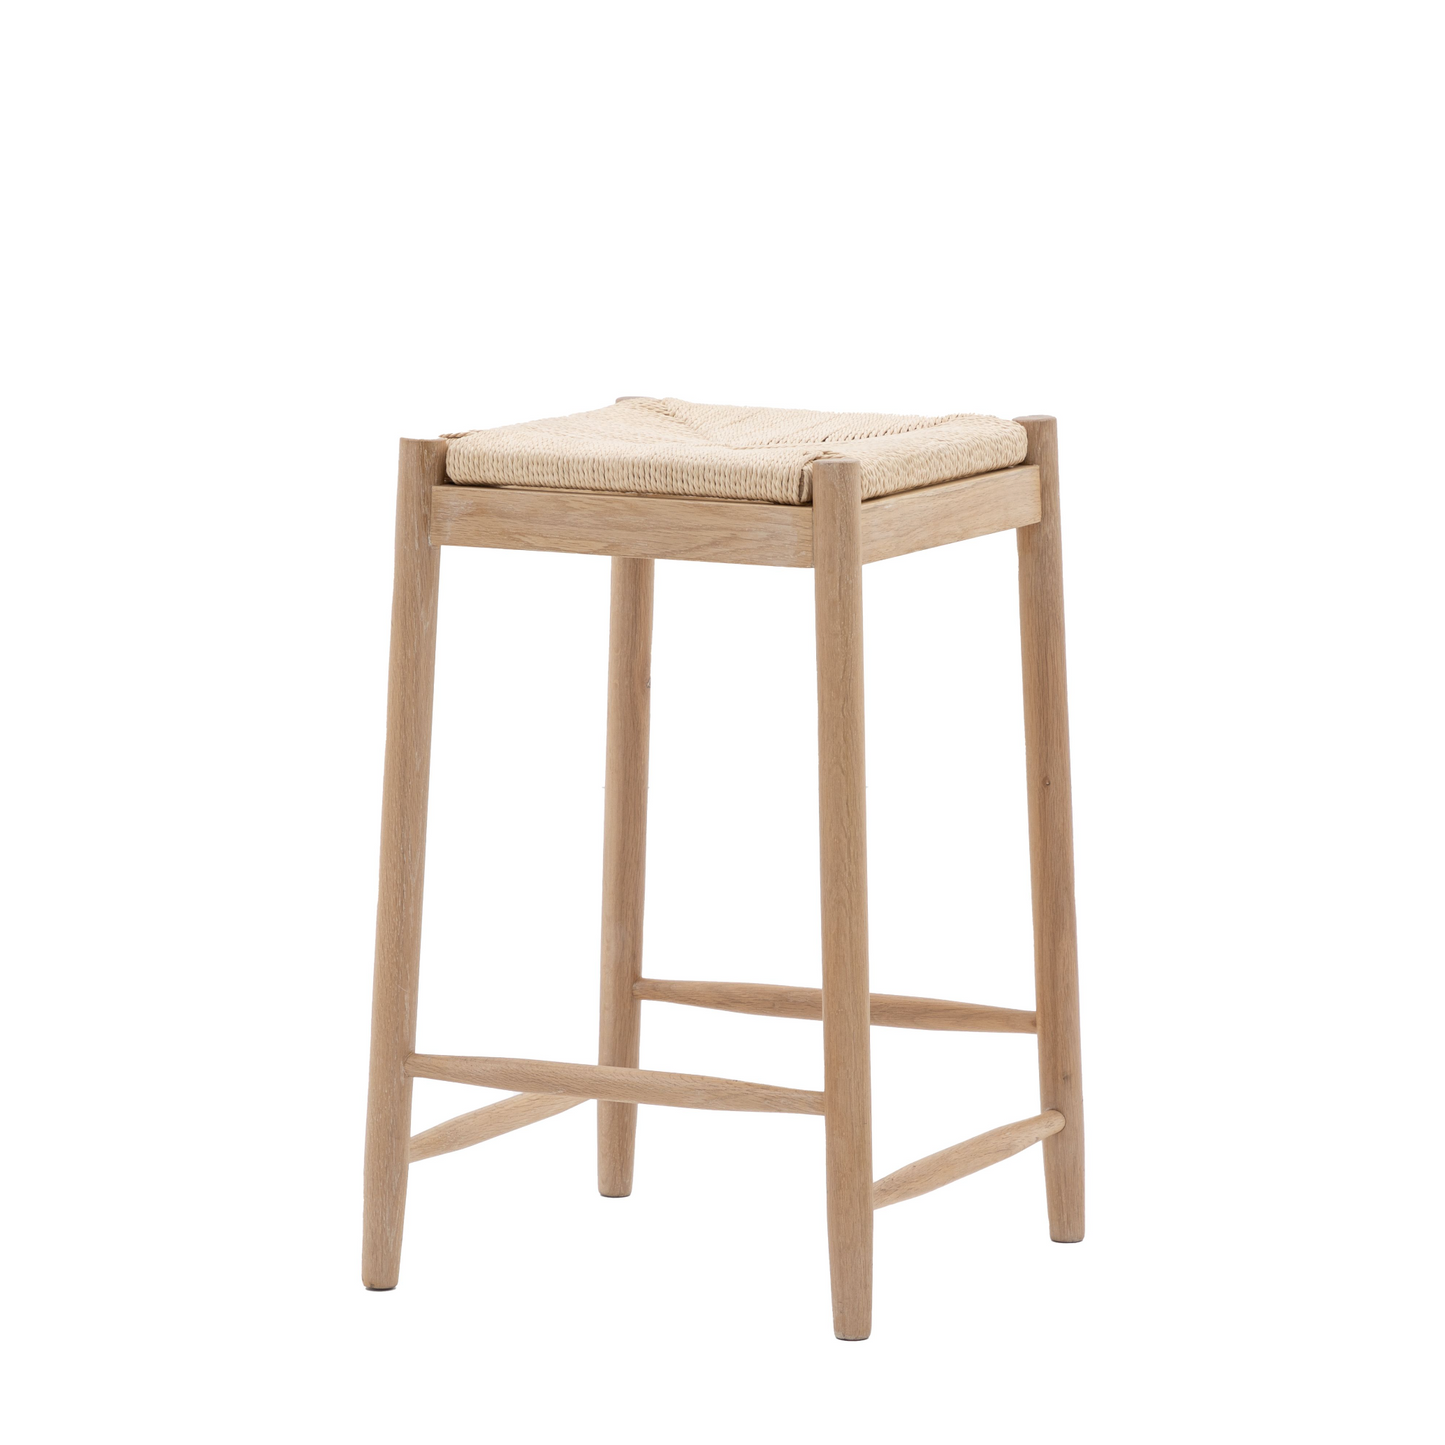 Load image into Gallery viewer, A Buckland Oak Stool with a beige seat for interior decor from Kikiathome.co.uk.
